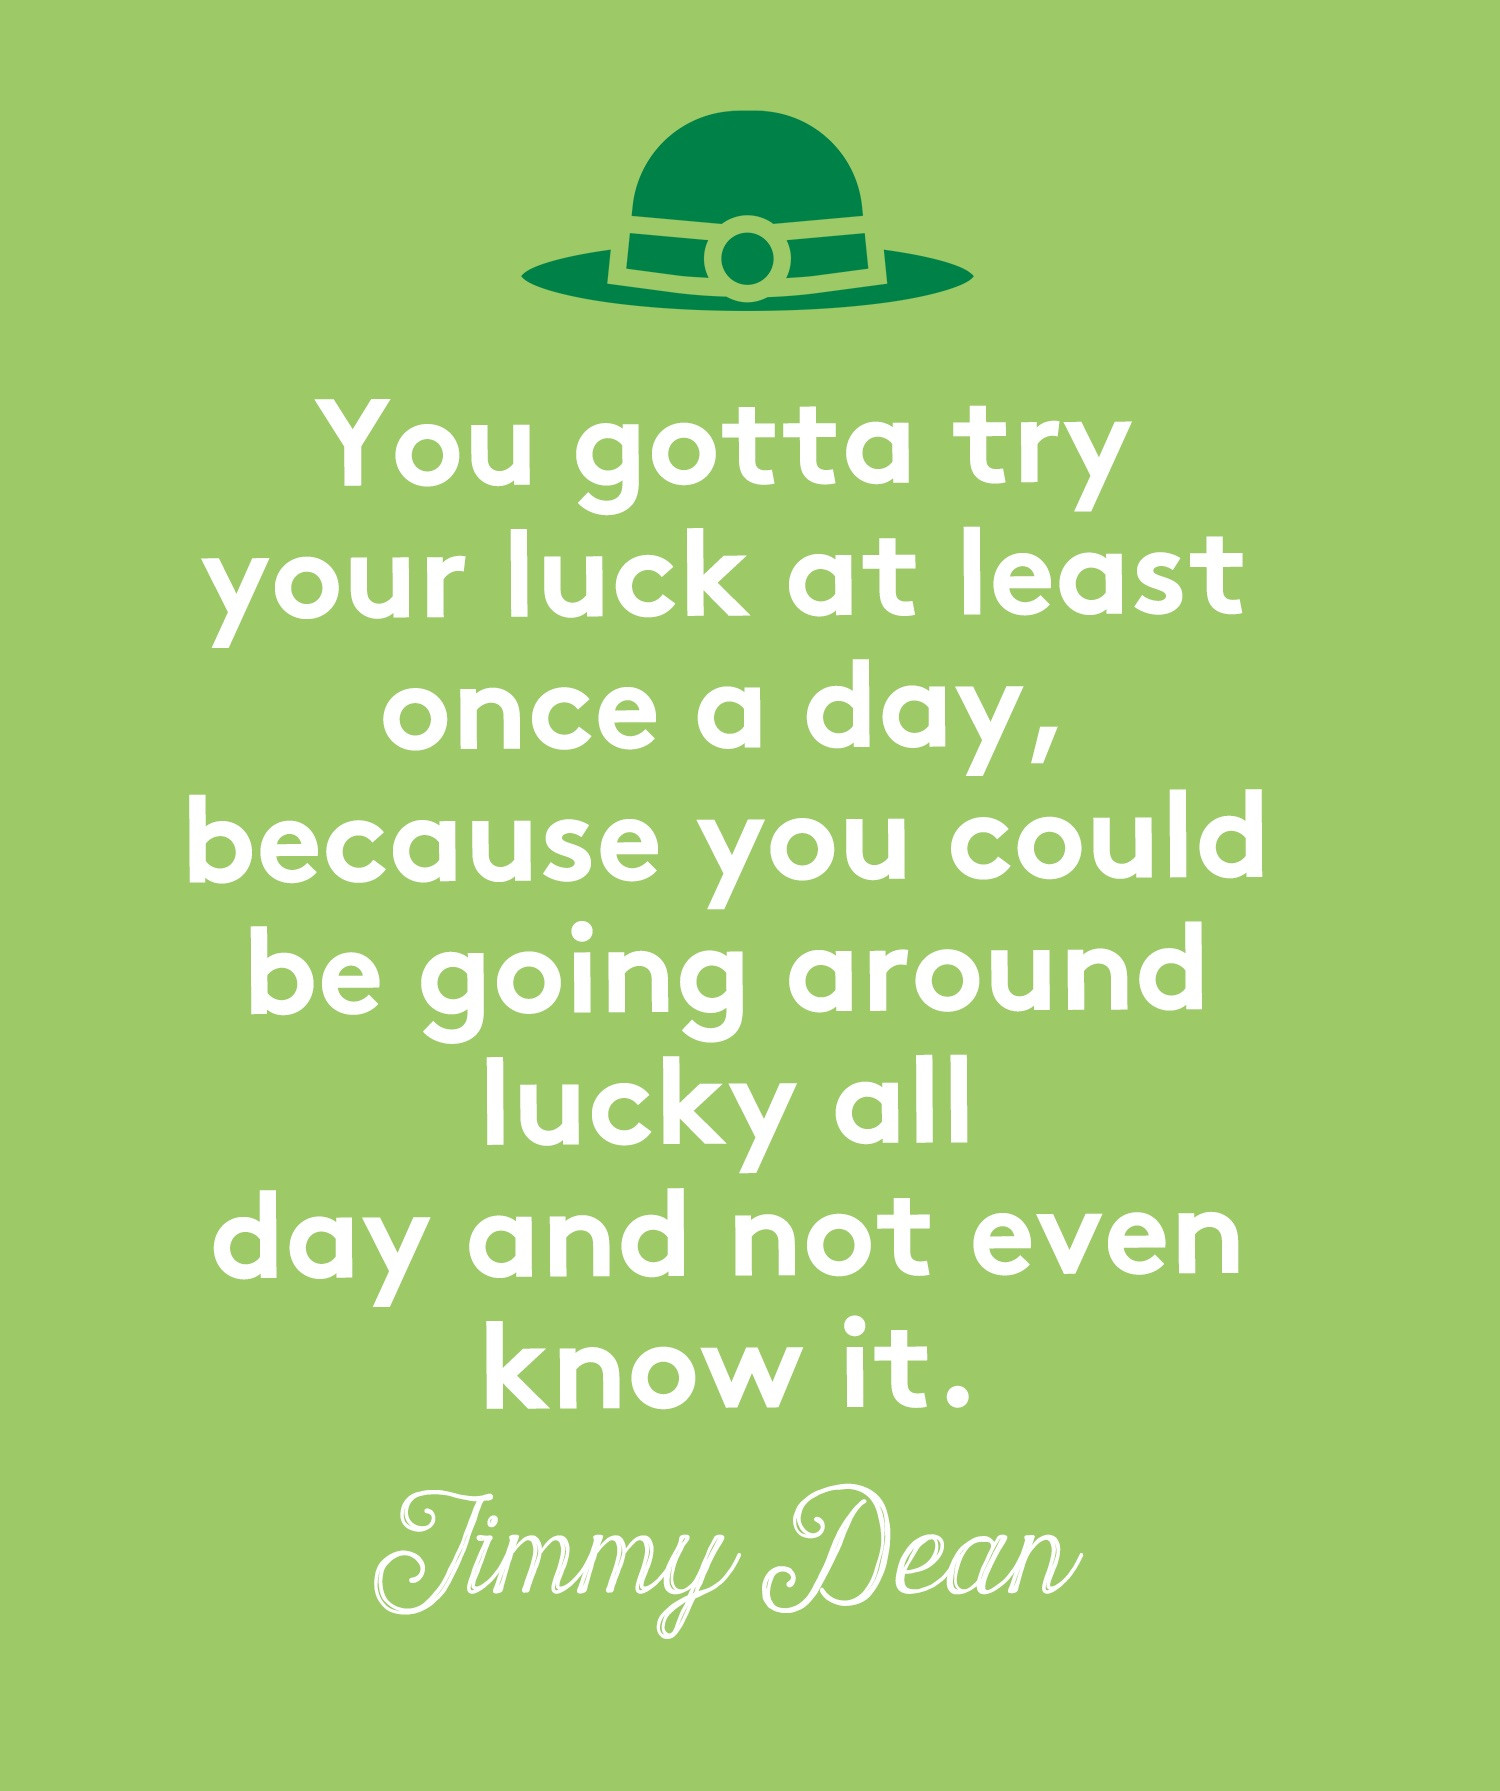 St Patrick's Day Quotes And Sayings
 9 St Patrick’s Day Memes and Quotes You’ll Send to